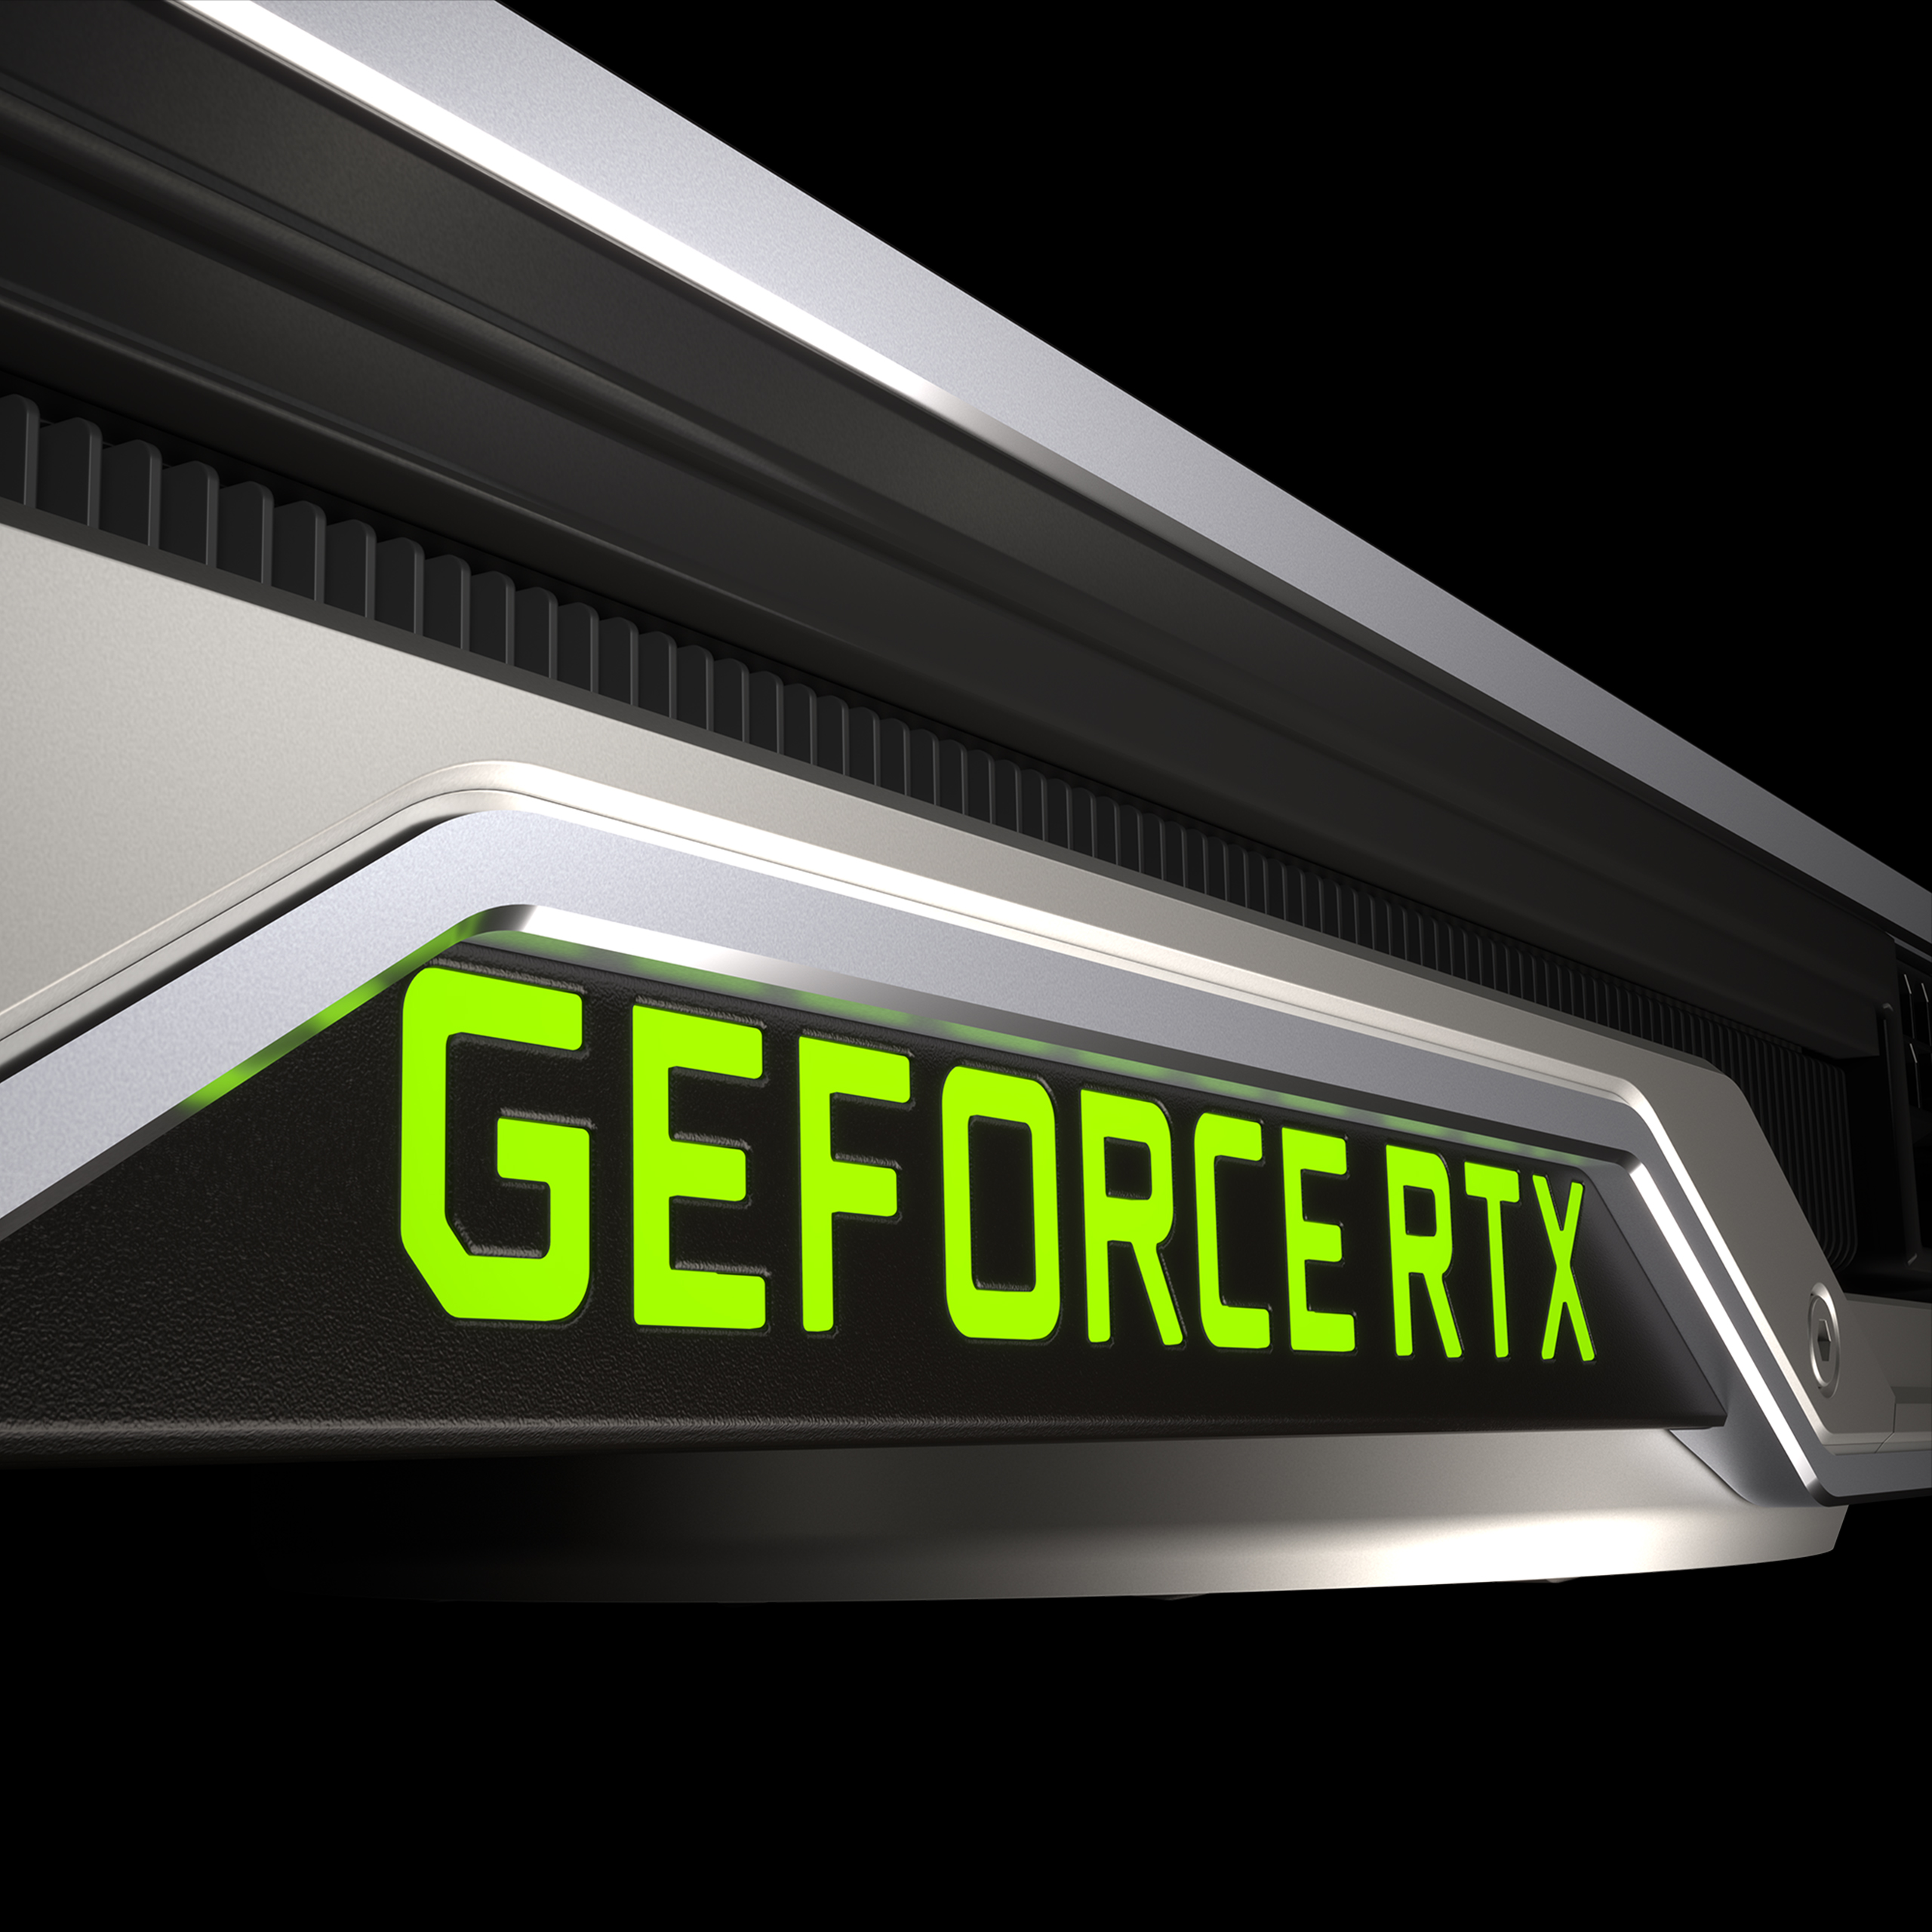 nvidia-hotfix-driver-fixes-bsod-issue-with-turing,-kepler-graphics-cards